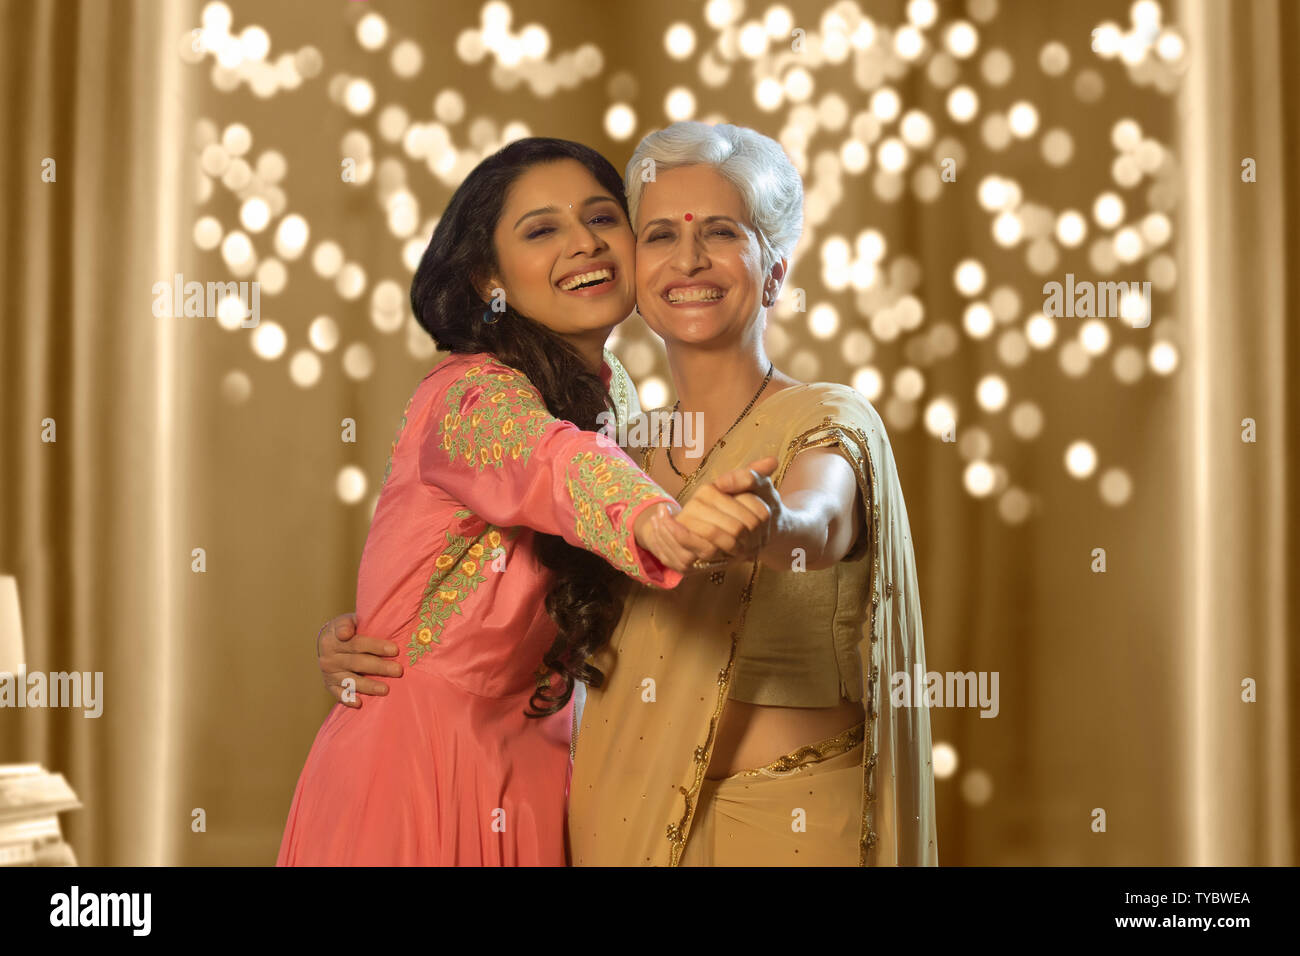 Mother-Daughter Dresses And Shots Ideas For An Indian Wedding - K4 Fashion  | Indian bride poses, Mother daughter wedding, Mother daughter wedding  photos